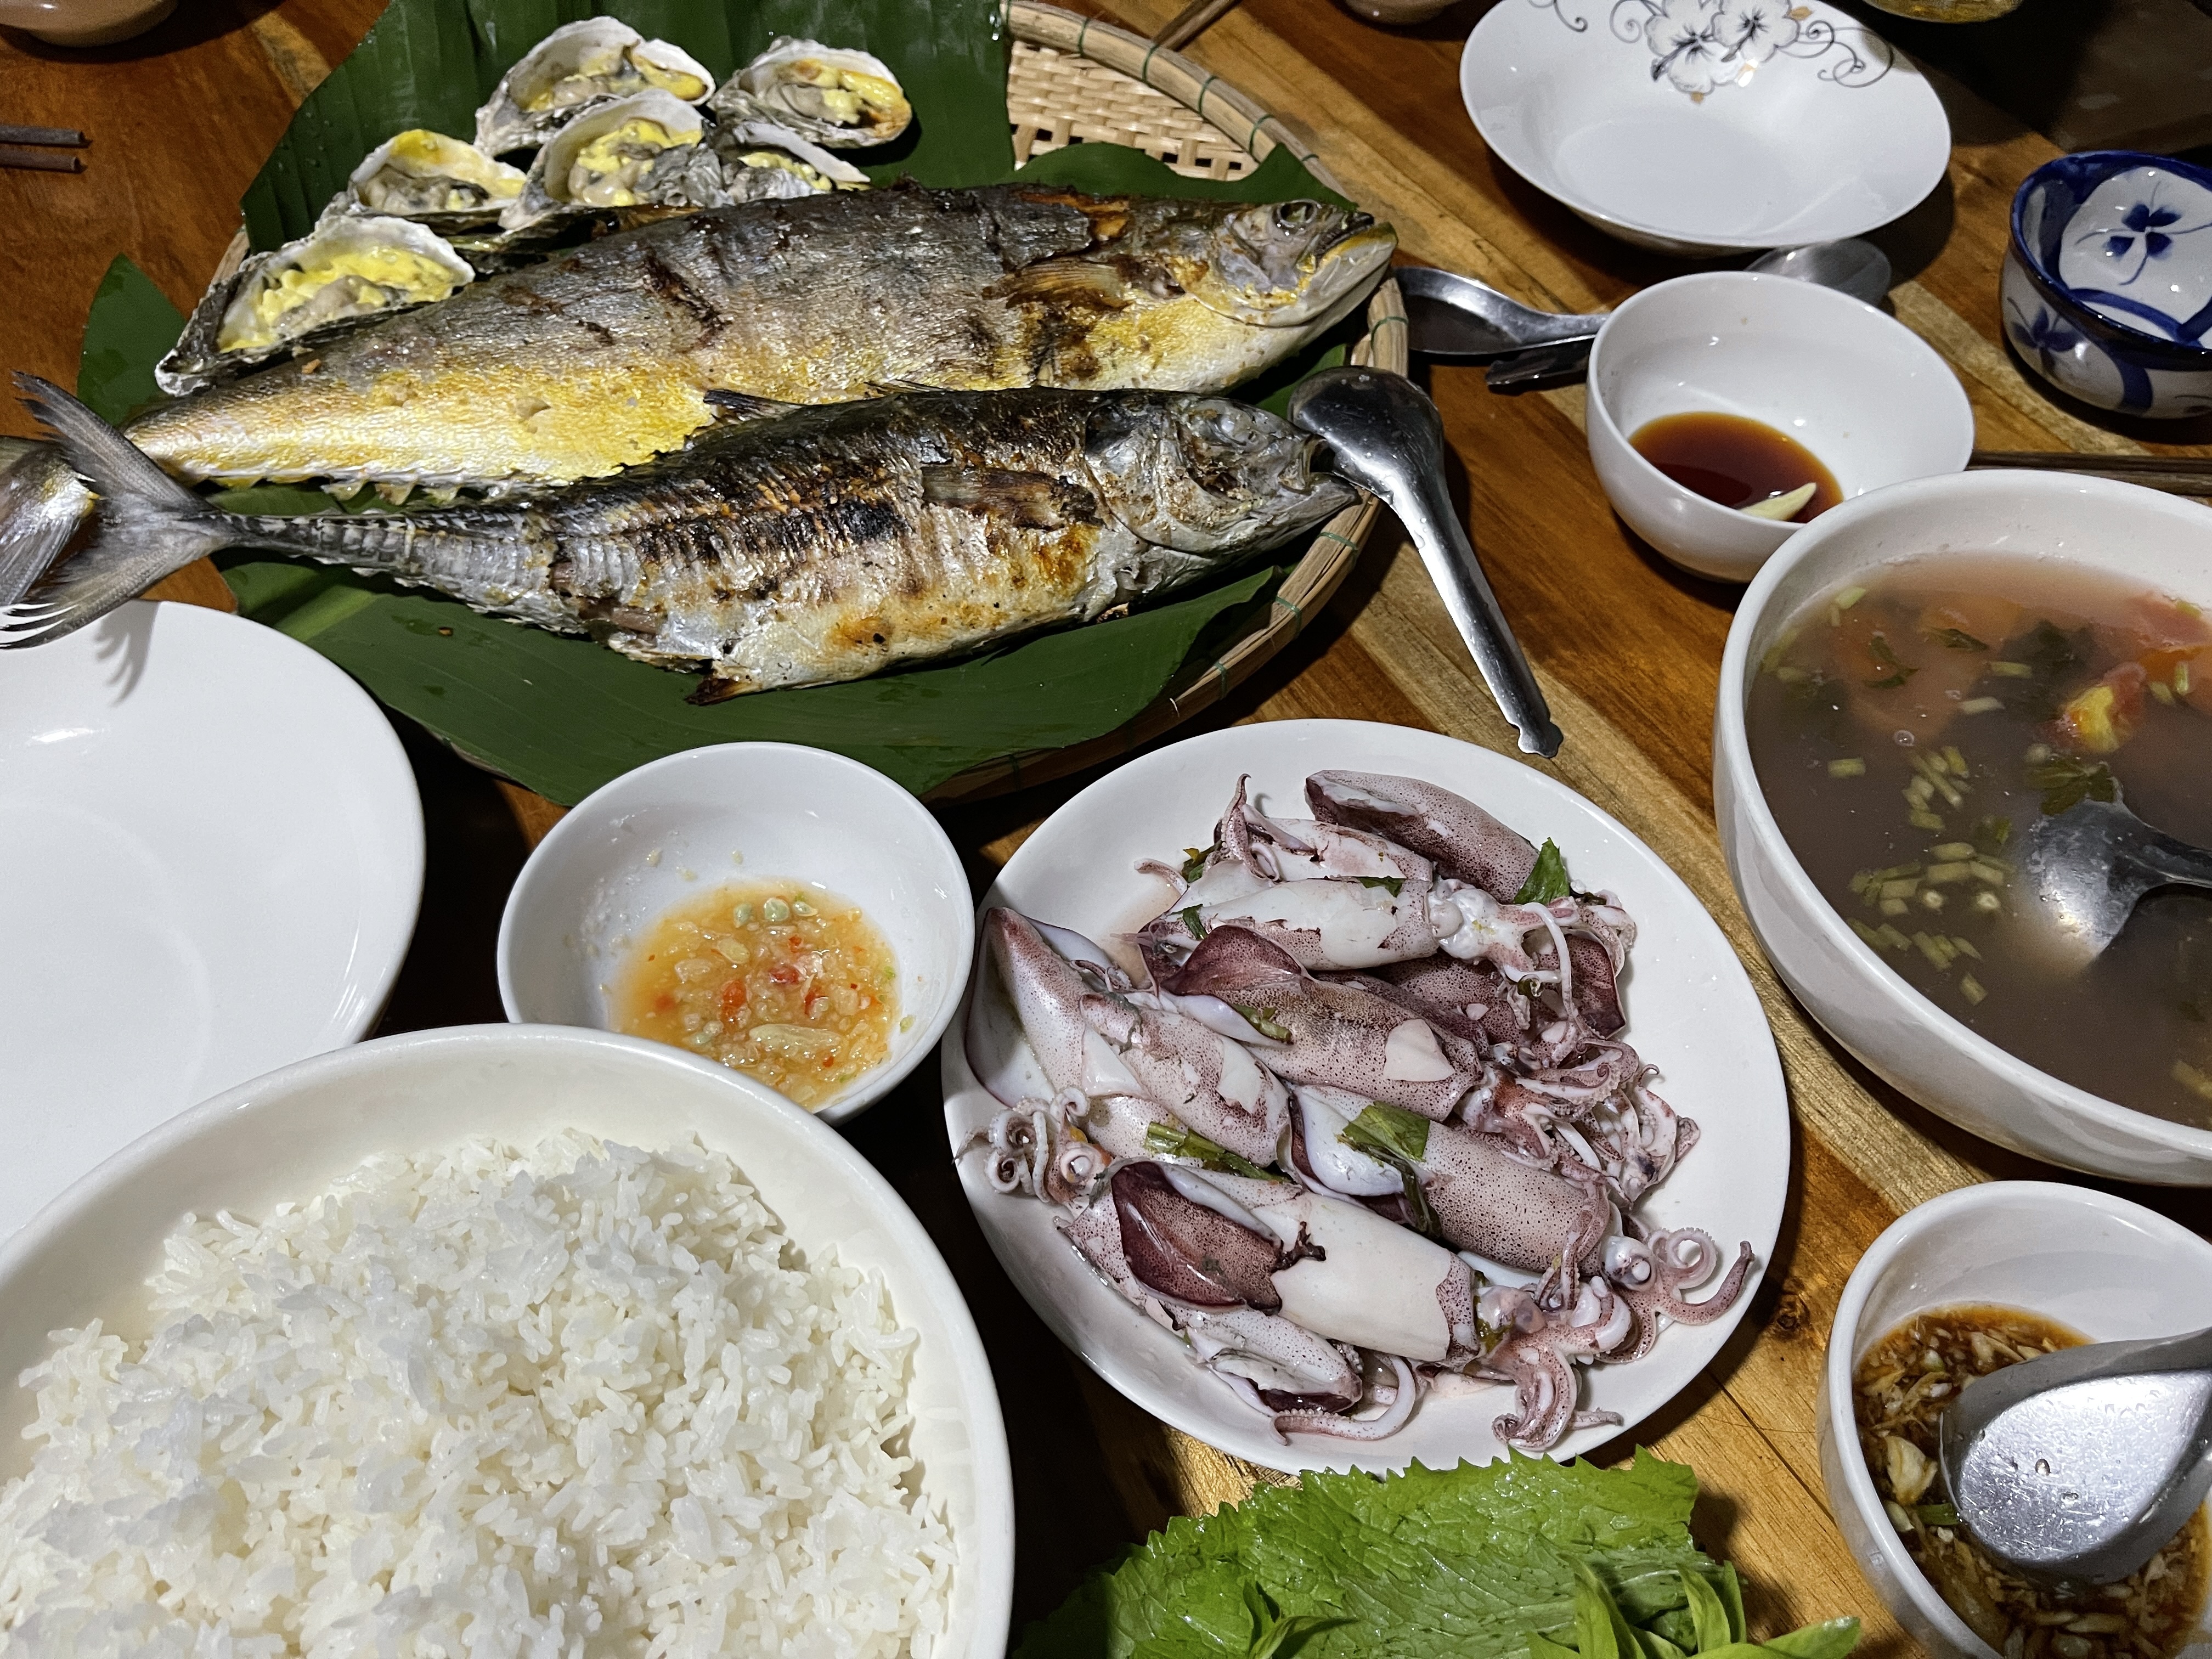 A homemade dinner for five with fresh seafood bought from Cau Sau Market in Phu Quoc, Vietnam. Photo: Dong Nguyen / Tuoi Tre News